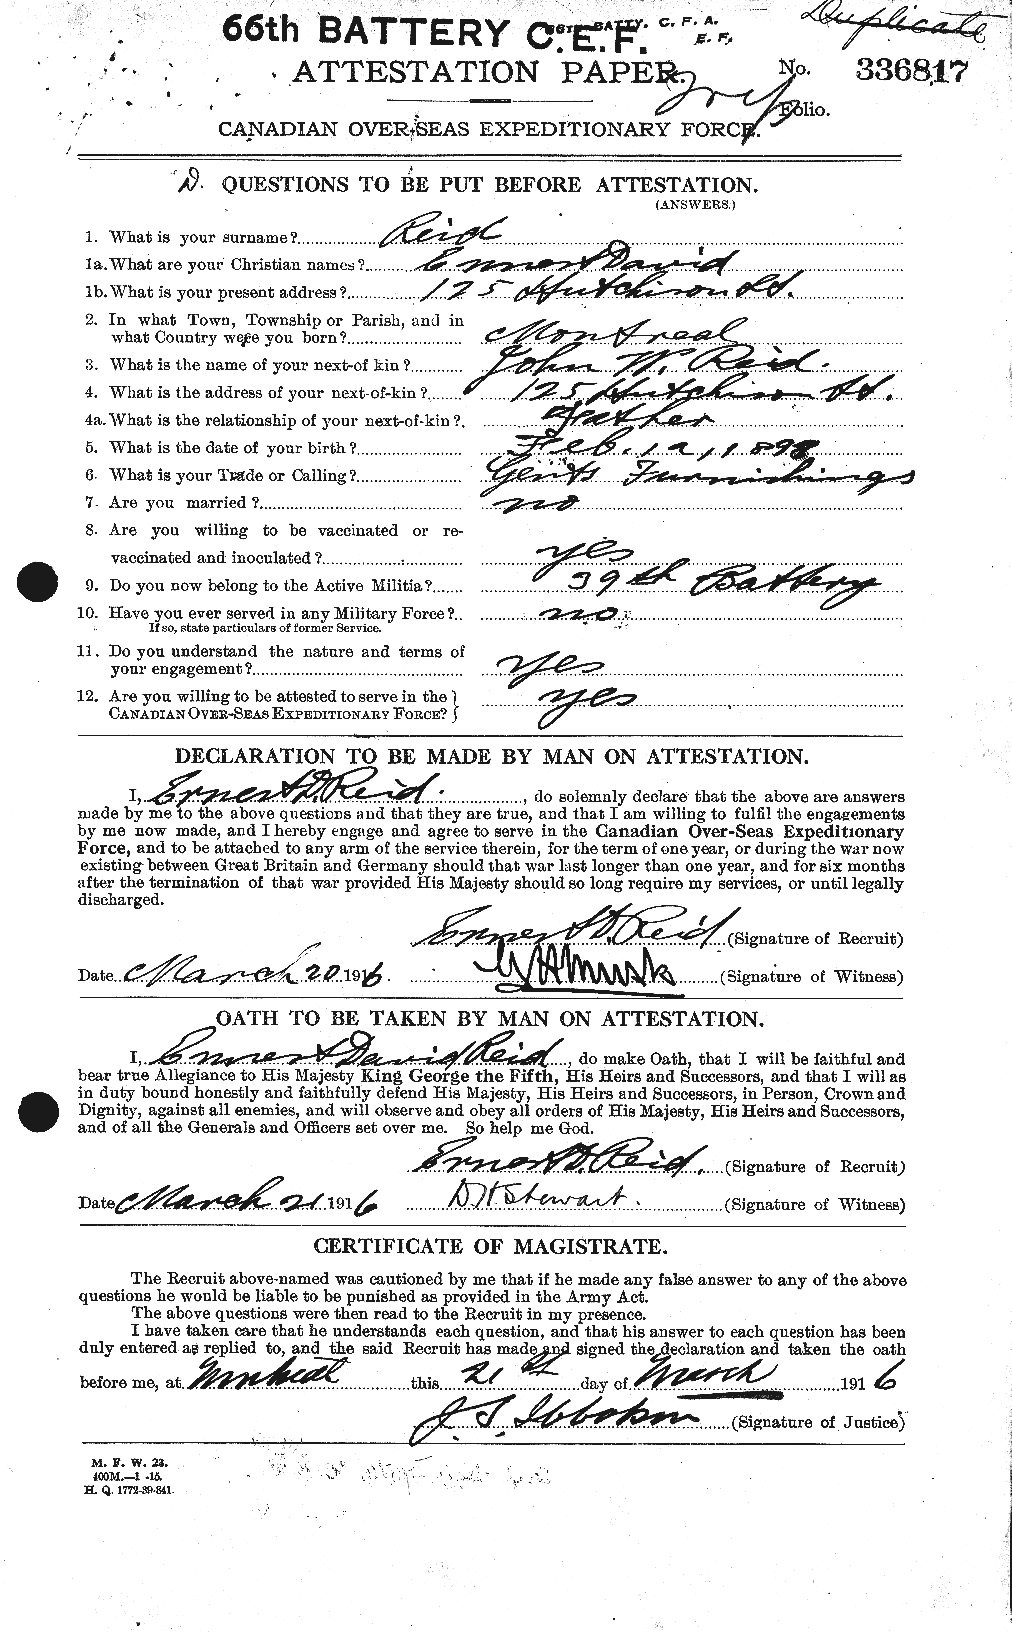 Personnel Records of the First World War - CEF 598015a